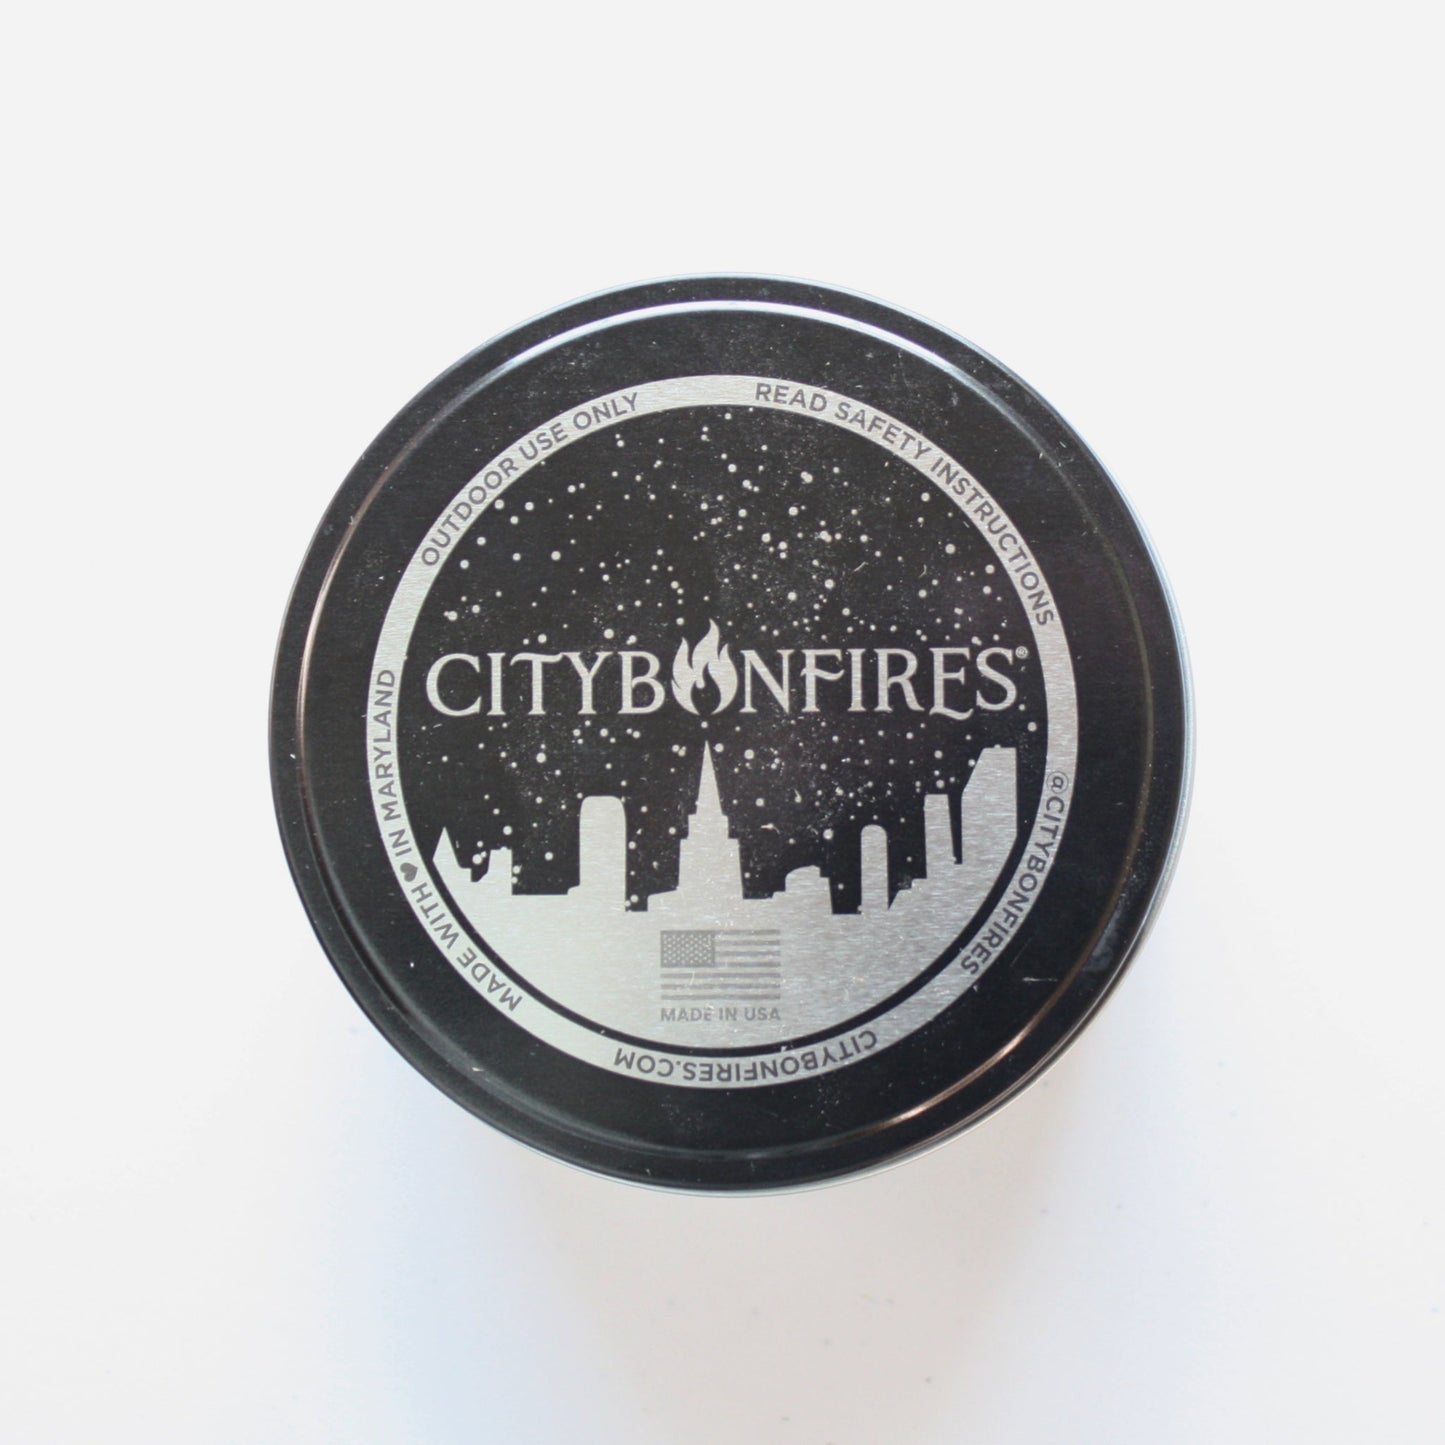 City Bonfires - Portable Fire Pit - Made in the USA